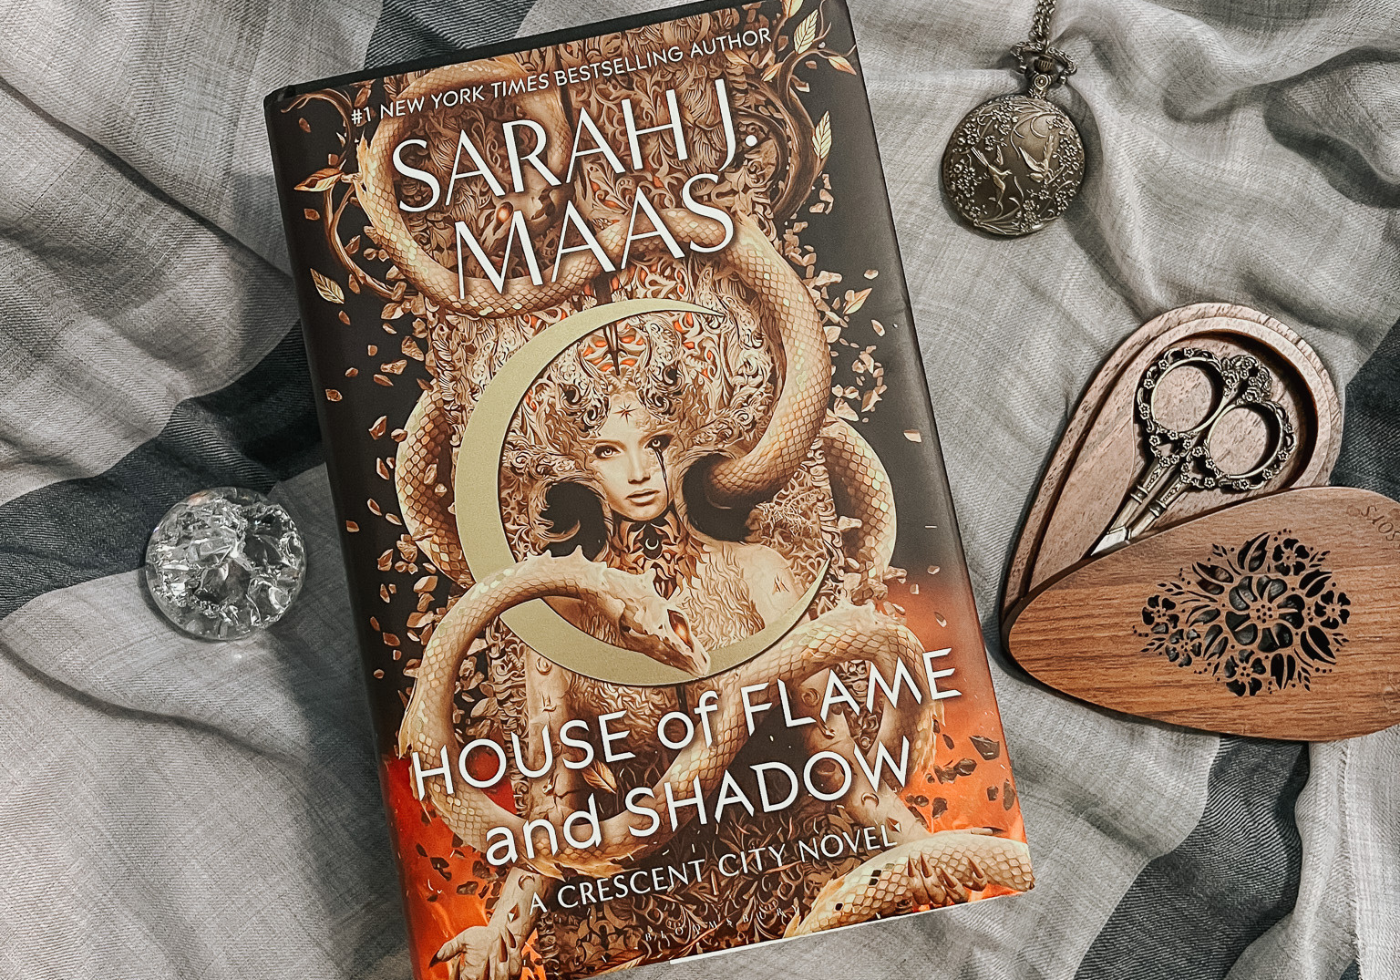 Crescent City book 3: House of Flame and Shadow book review